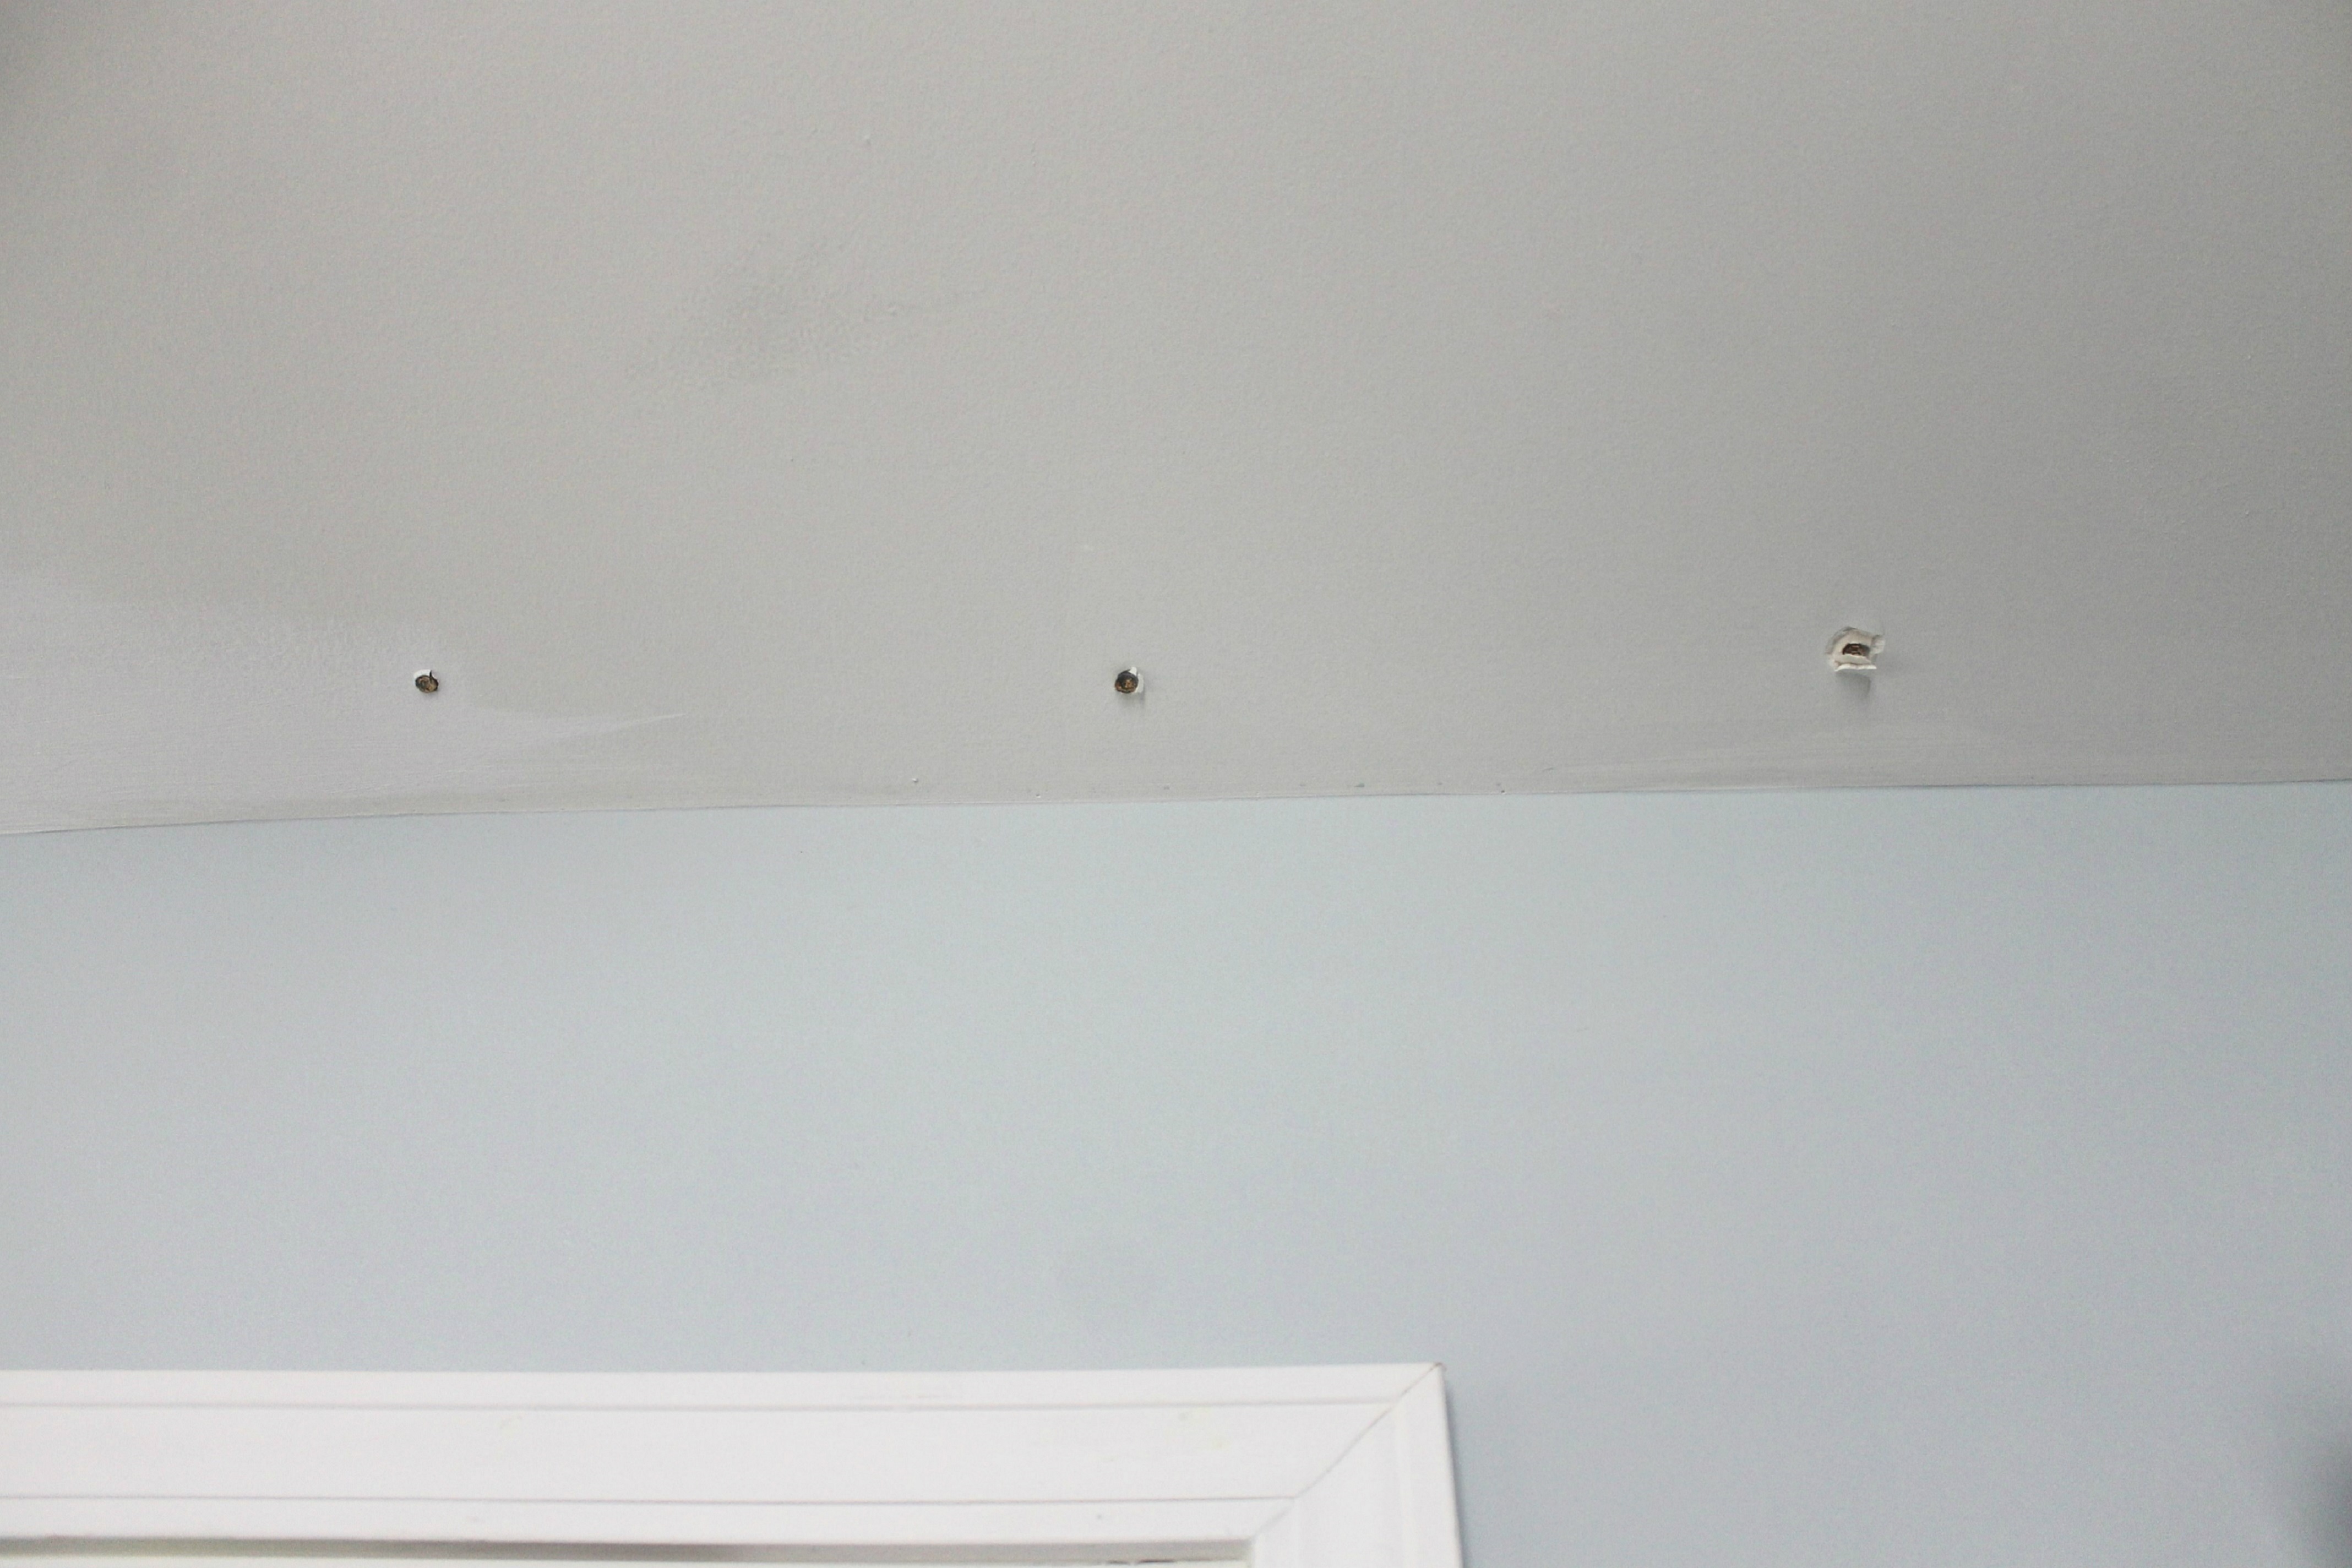 Drywall Nail Pops: How To Fix Nail Pops in Your Drywall